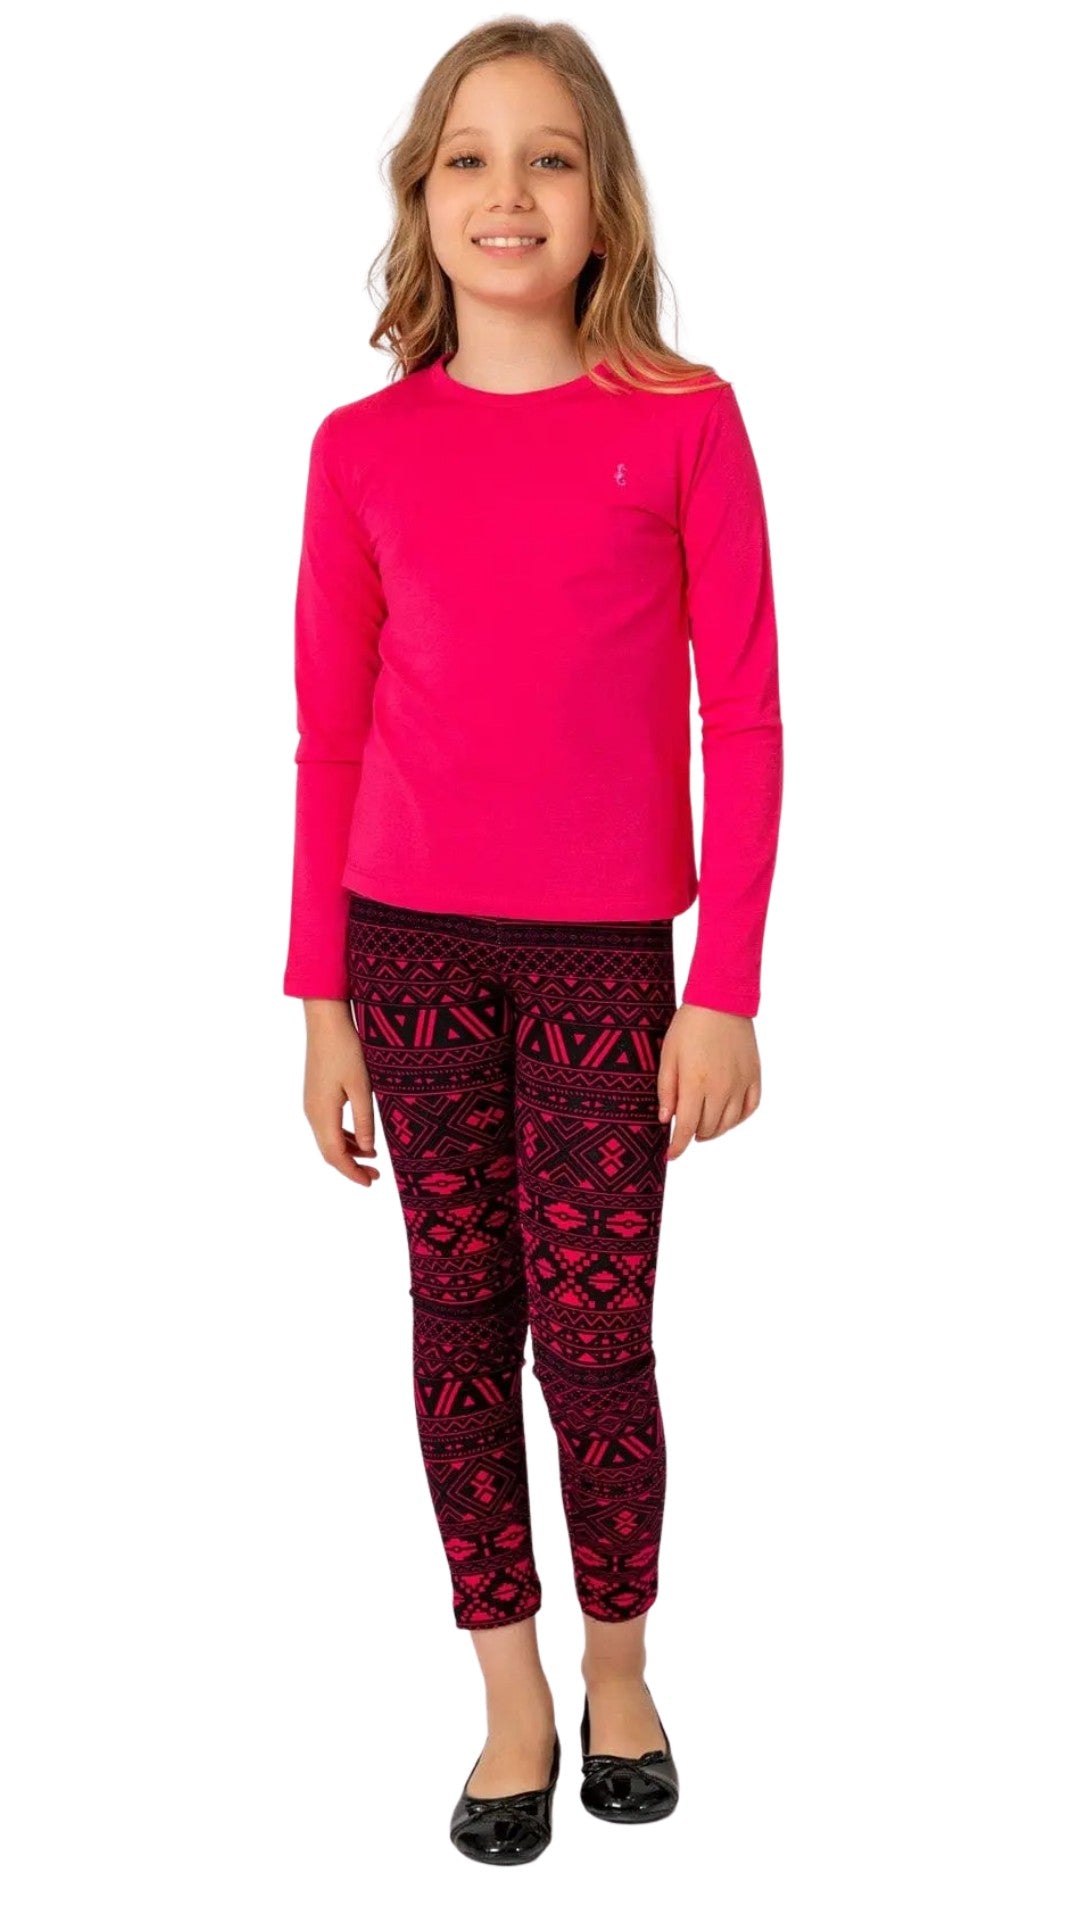 Stretch is Comfort STRETCH IS COMFORT Girl's Cotton Leggings